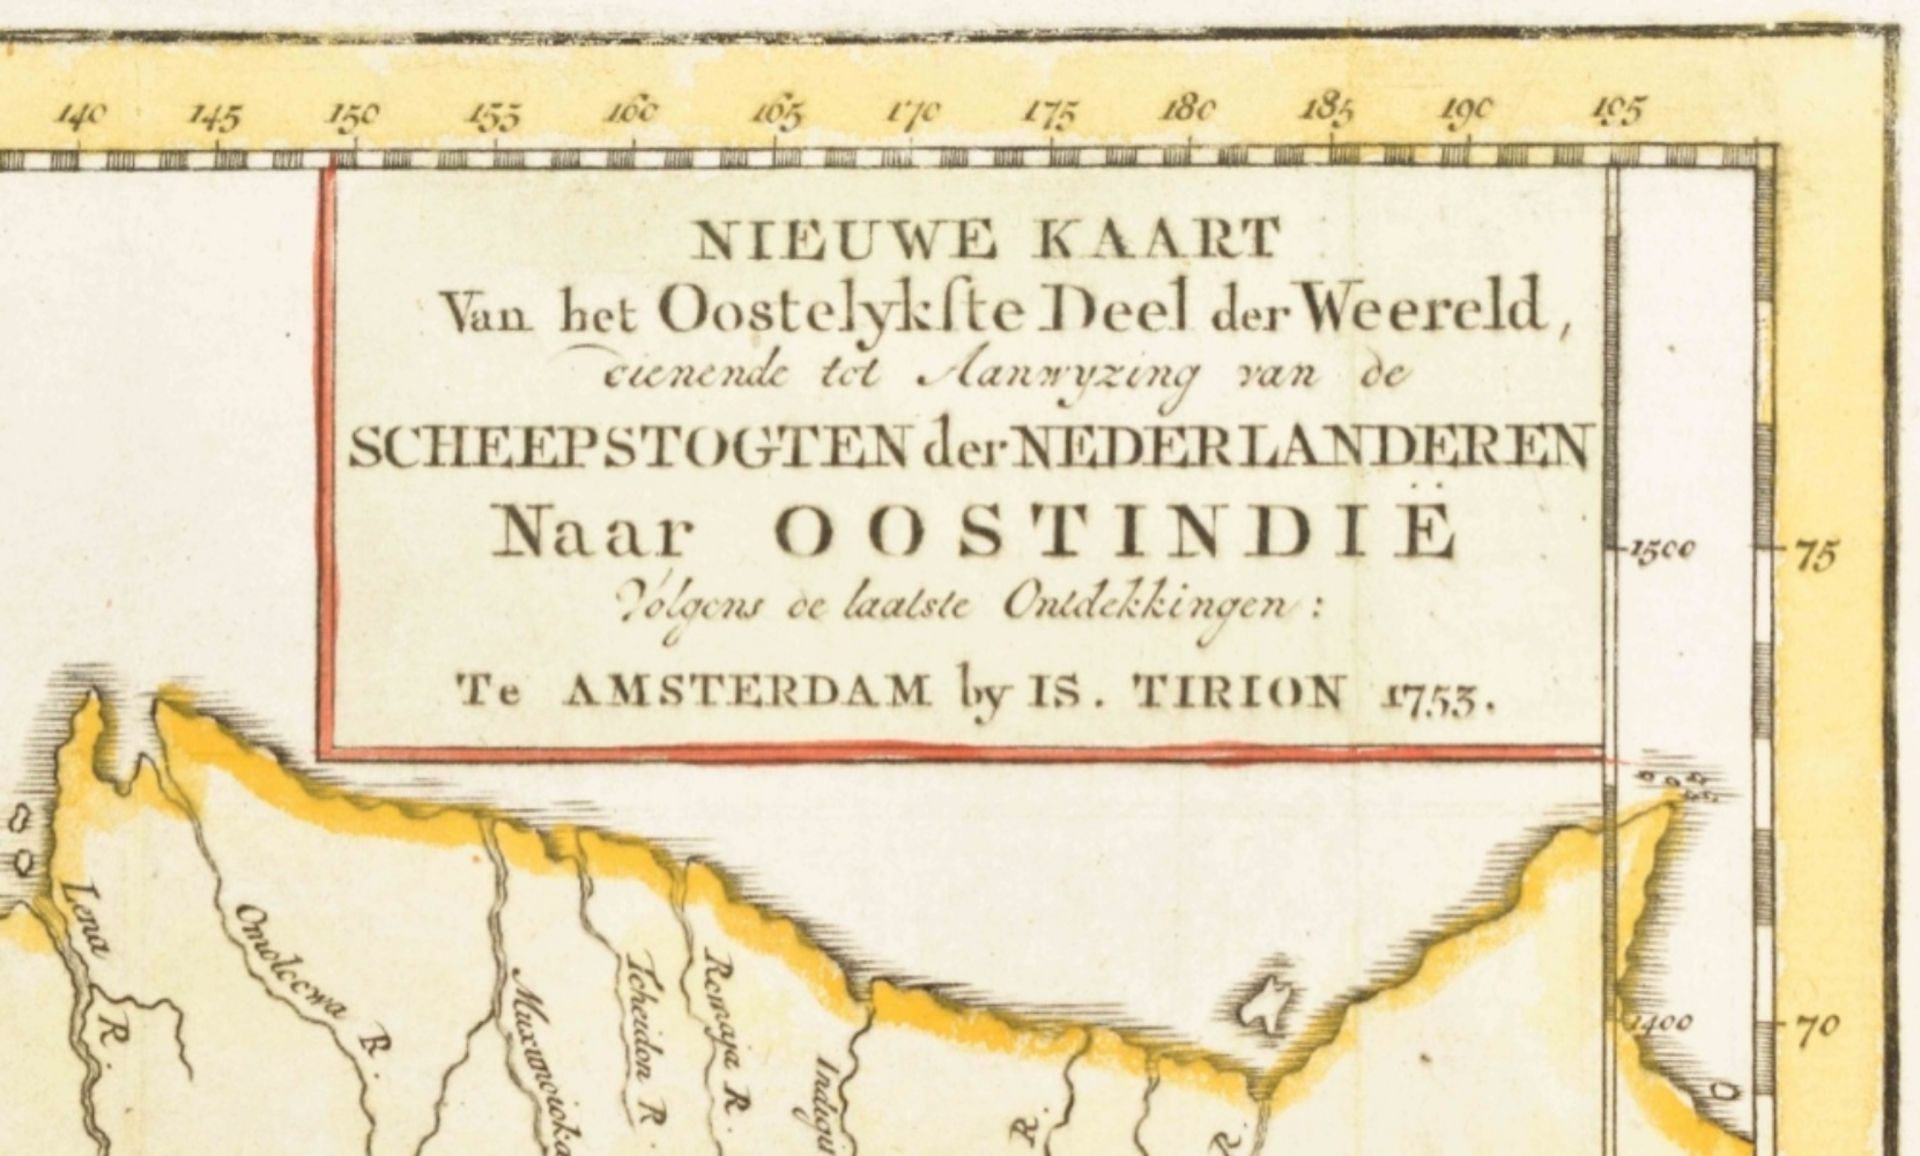 Three maps publ. by Isaak Tirion: Nieuwe Kaart - Image 6 of 6